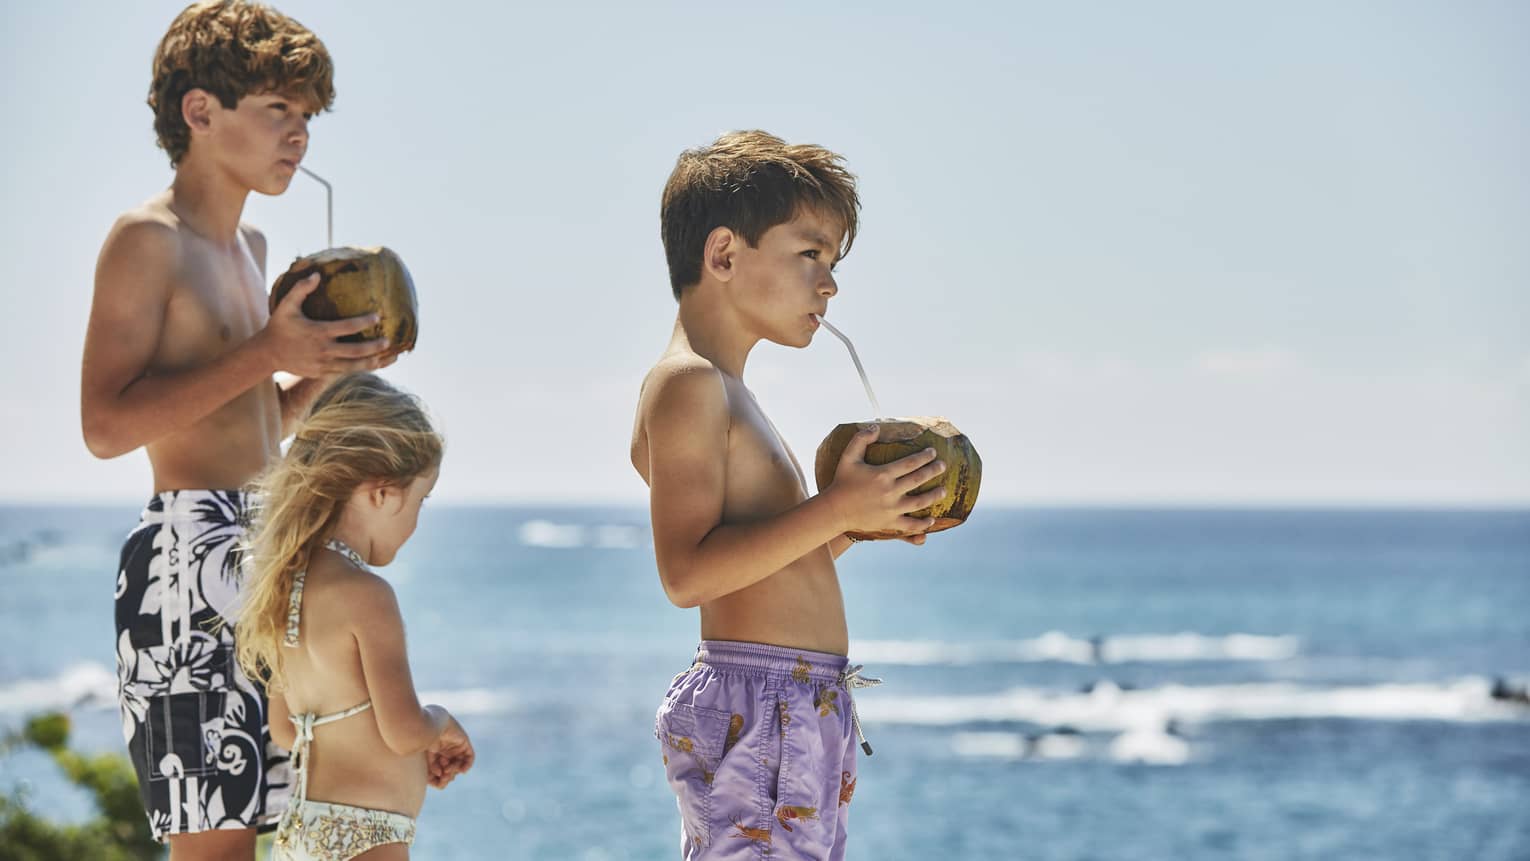 Three guests standing near the ocean and drinking from a coconut.